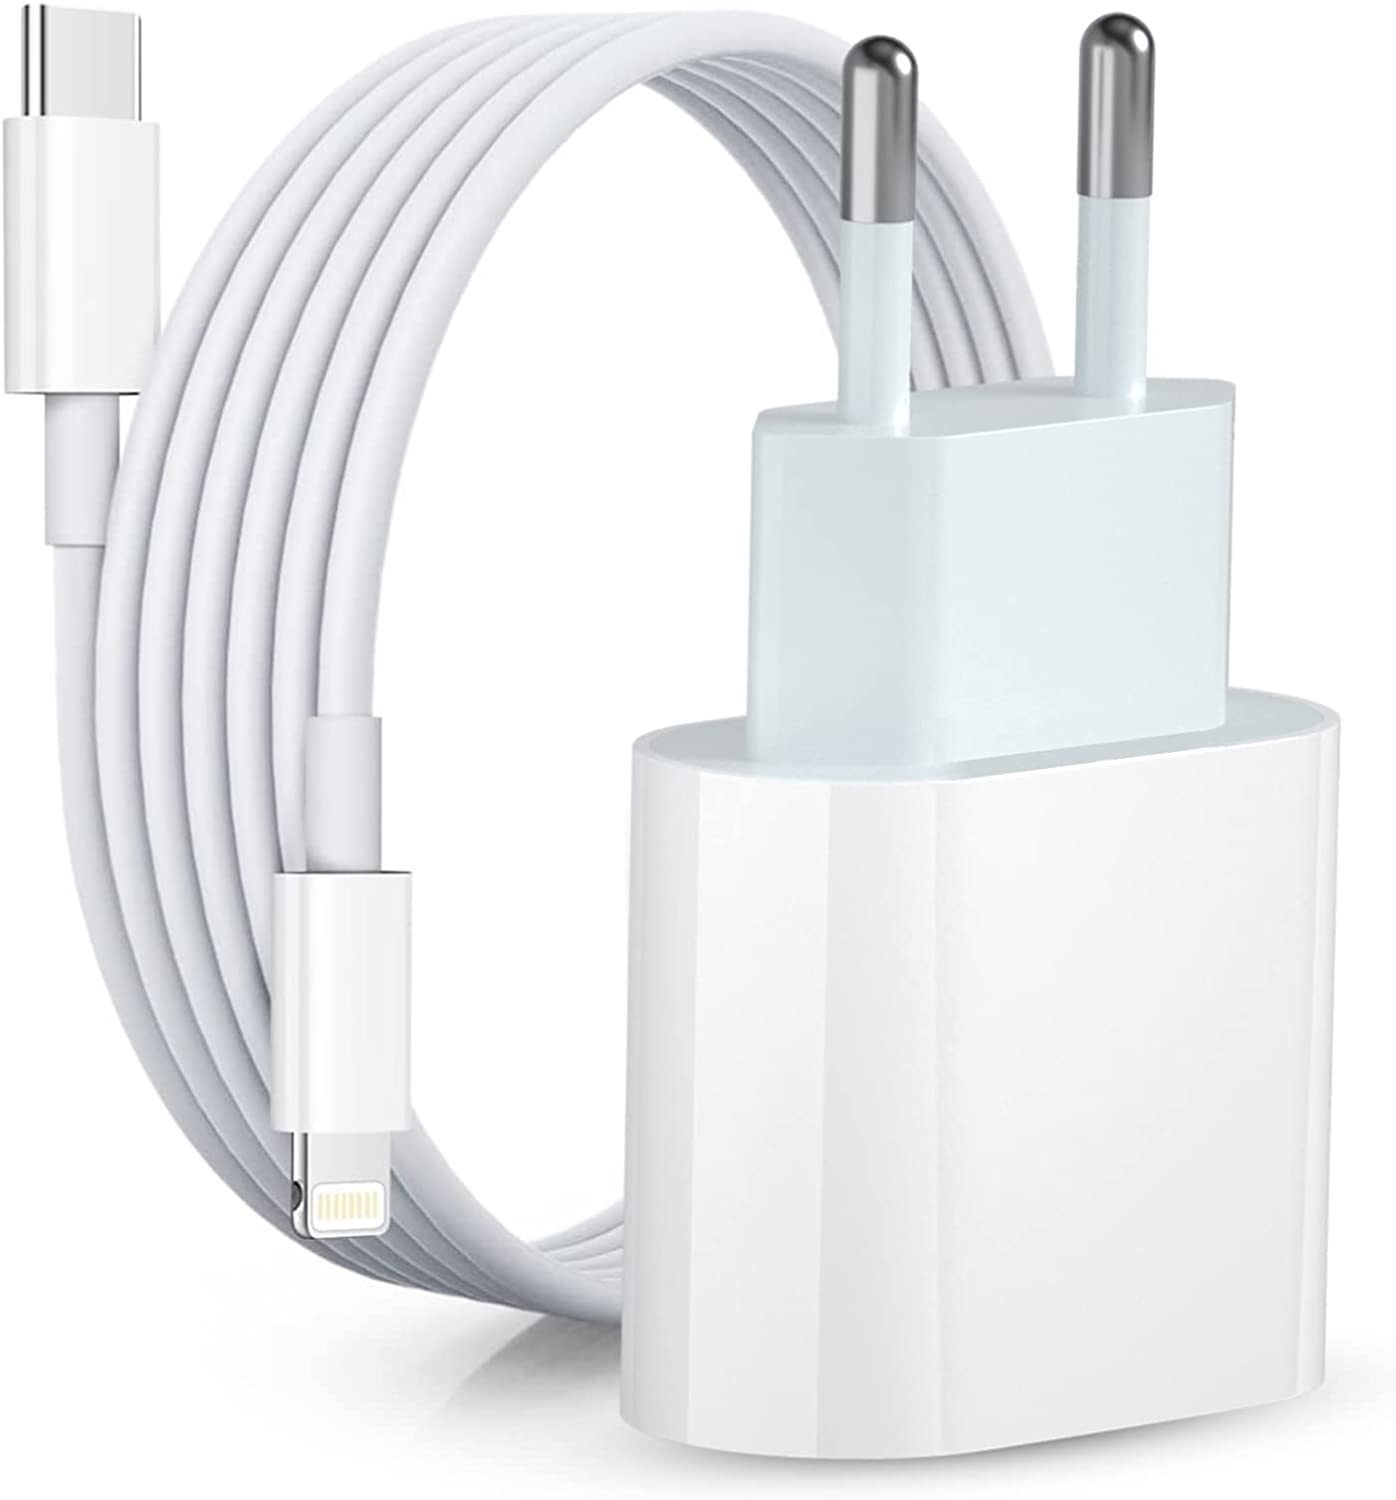 14 Pro Max lader USB-C Adapter - Oplader iPhone 14 Pro Max + iPhone Oplader Kabel 1 Meter USB C Oplader 20w iPhone Lader - Oplaadstekker USB-C voor Apple iPhone 14 /14 Pro Max - Phonecompleet.nl